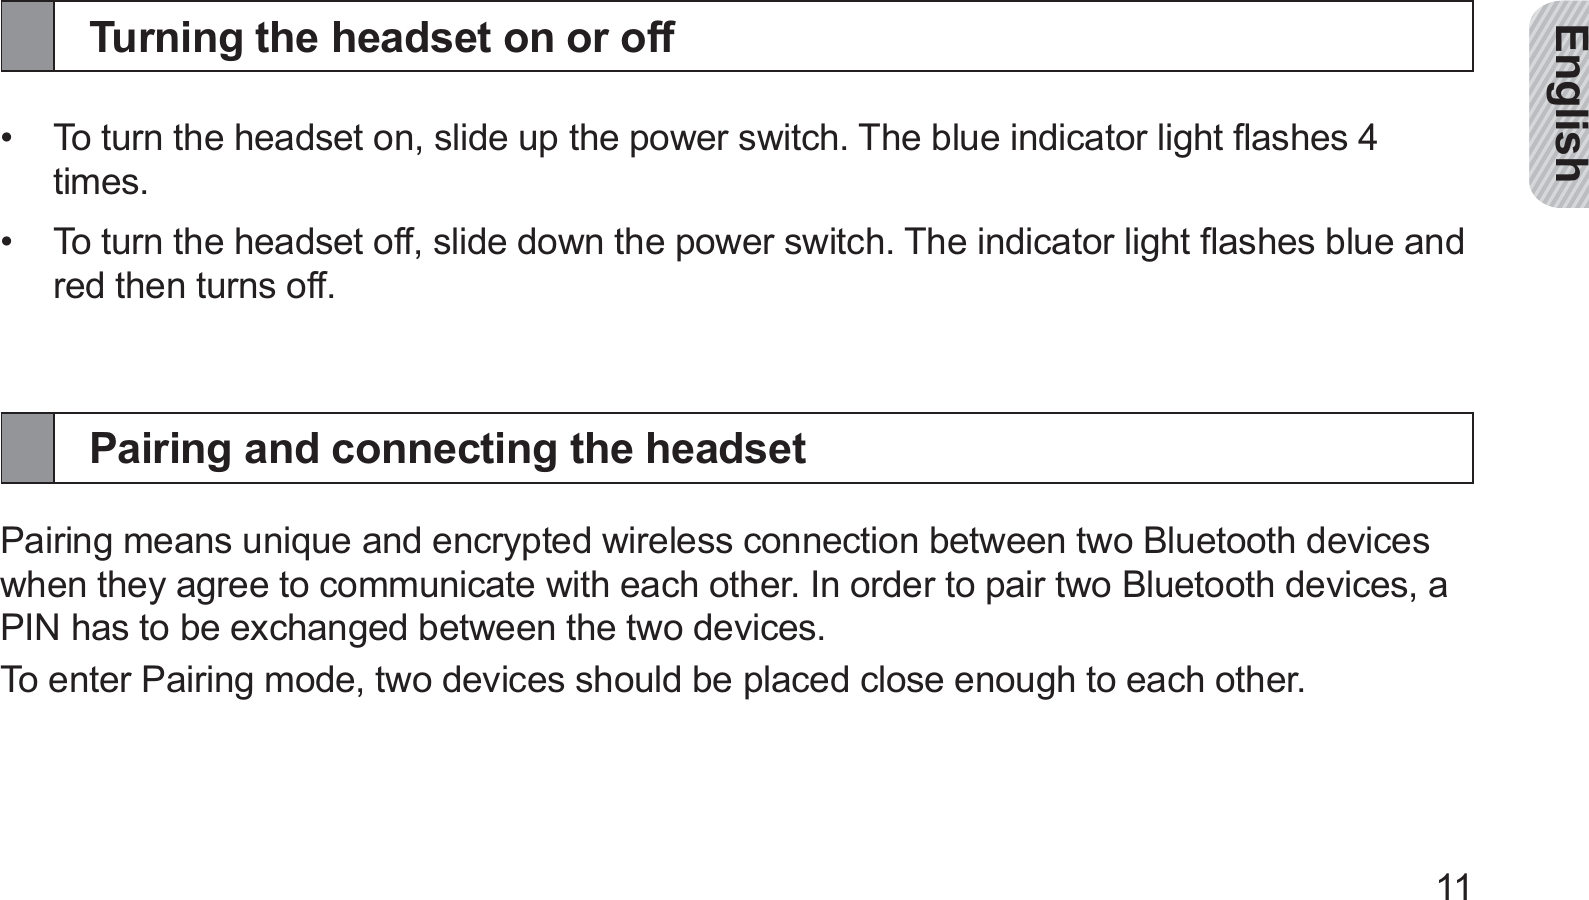 English11Turning the headset on or offTo turn the headset on, slide up the power switch. The blue indicator light ﬂashes 4 • times.To turn the headset off, slide down the power switch. The indicator light ﬂashes blue and • red then turns off.Pairing and connecting the headsetPairing means unique and encrypted wireless connection between two Bluetooth devices when they agree to communicate with each other. In order to pair two Bluetooth devices, a PIN has to be exchanged between the two devices.To enter Pairing mode, two devices should be placed close enough to each other.